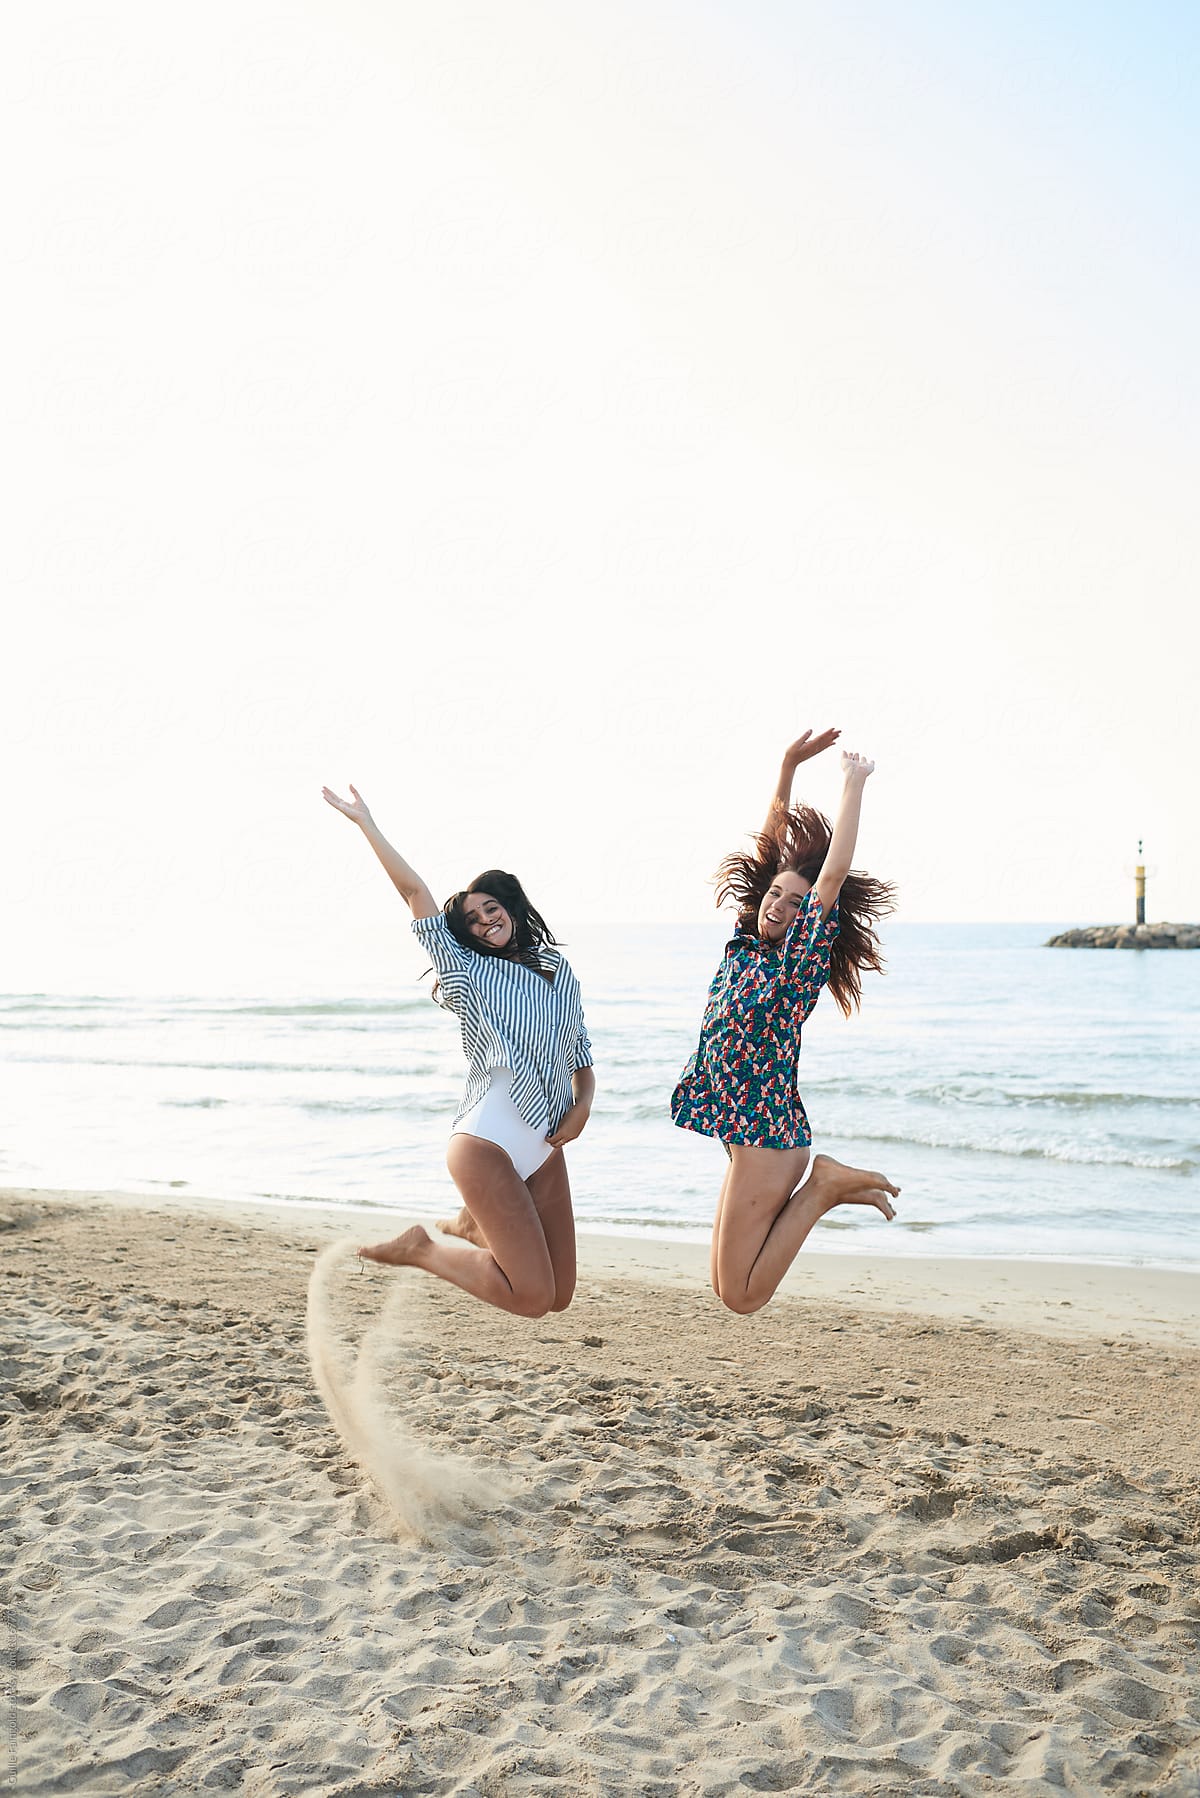 Happy women jumping together on beach